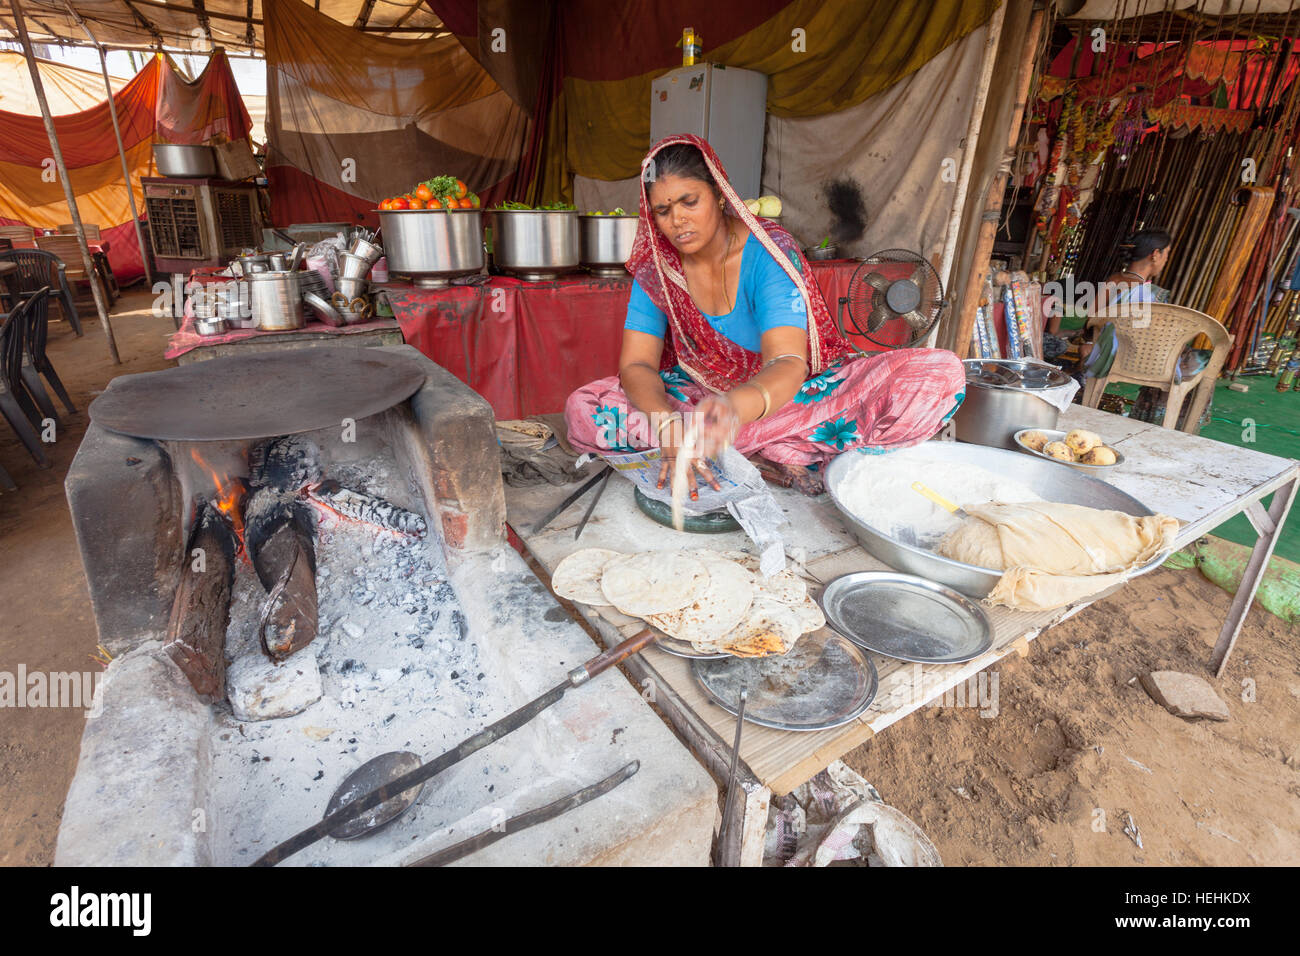 Woman making, cooking and selling chapatis or traditional Indian bread in a street stall, Pushkar, India Stock Photo